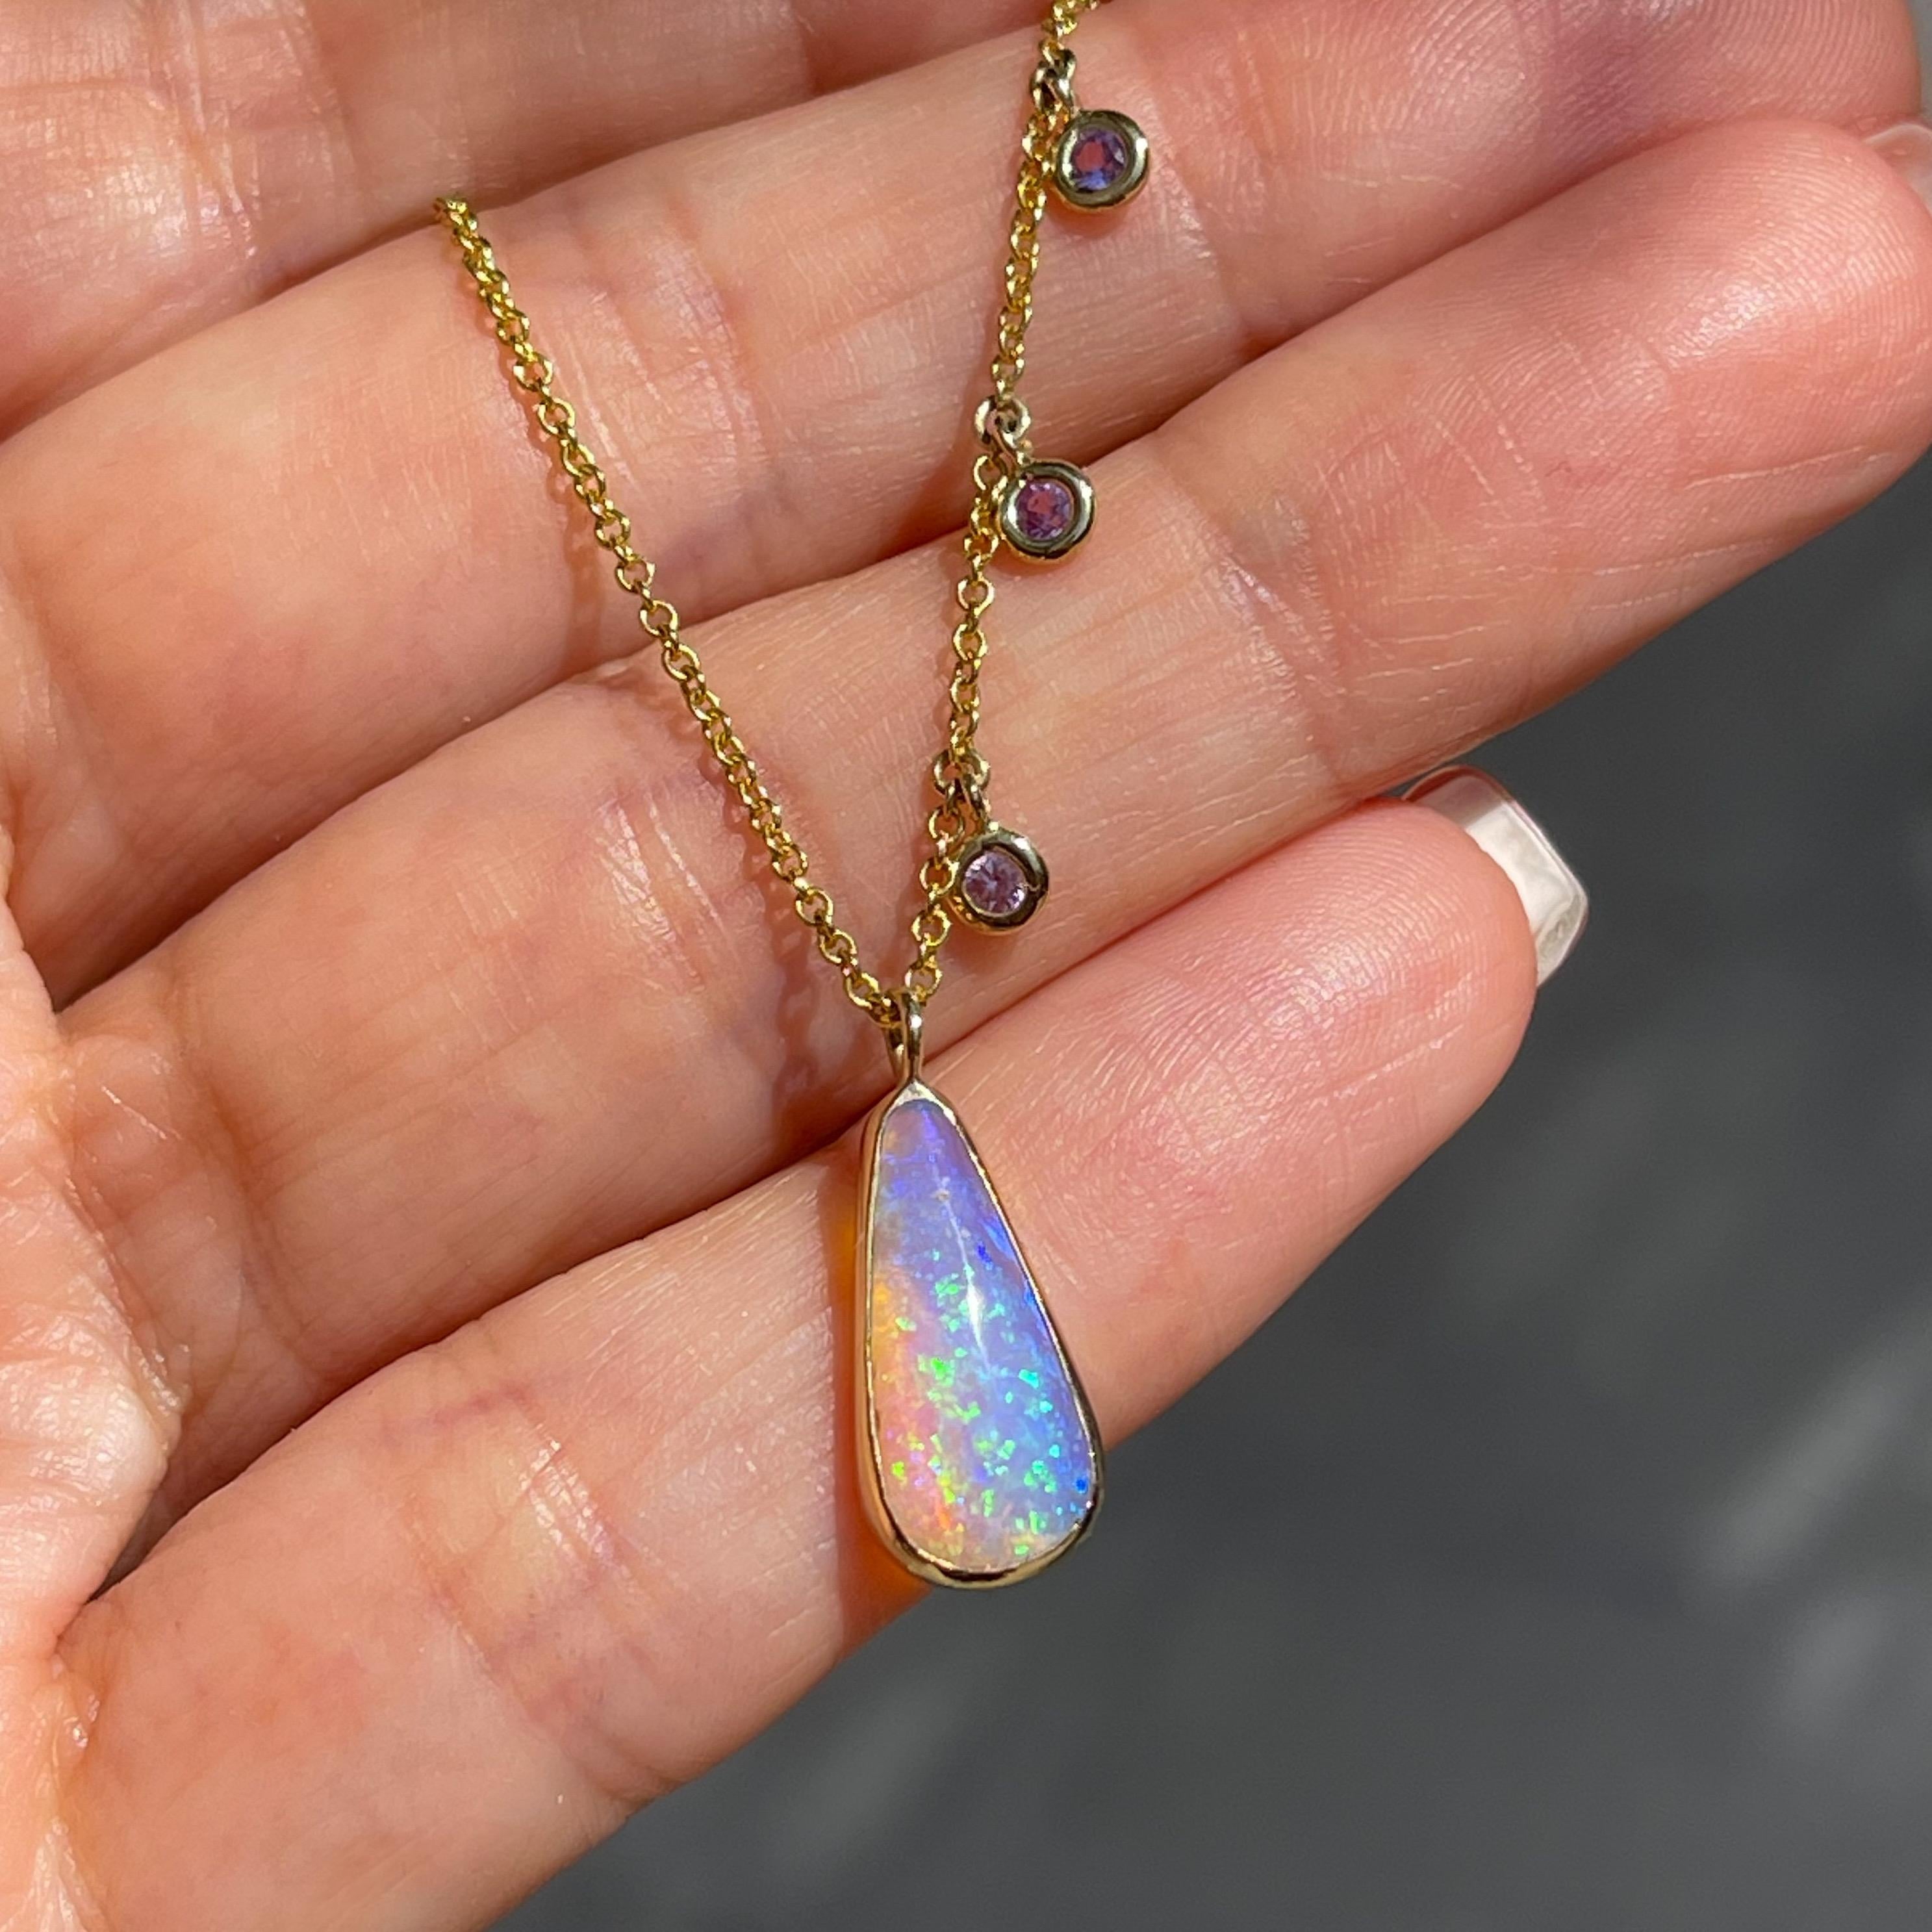 NIXIN Jewelry Dawn's Light Australian Opal Necklace with Sapphires in Rose Gold 2